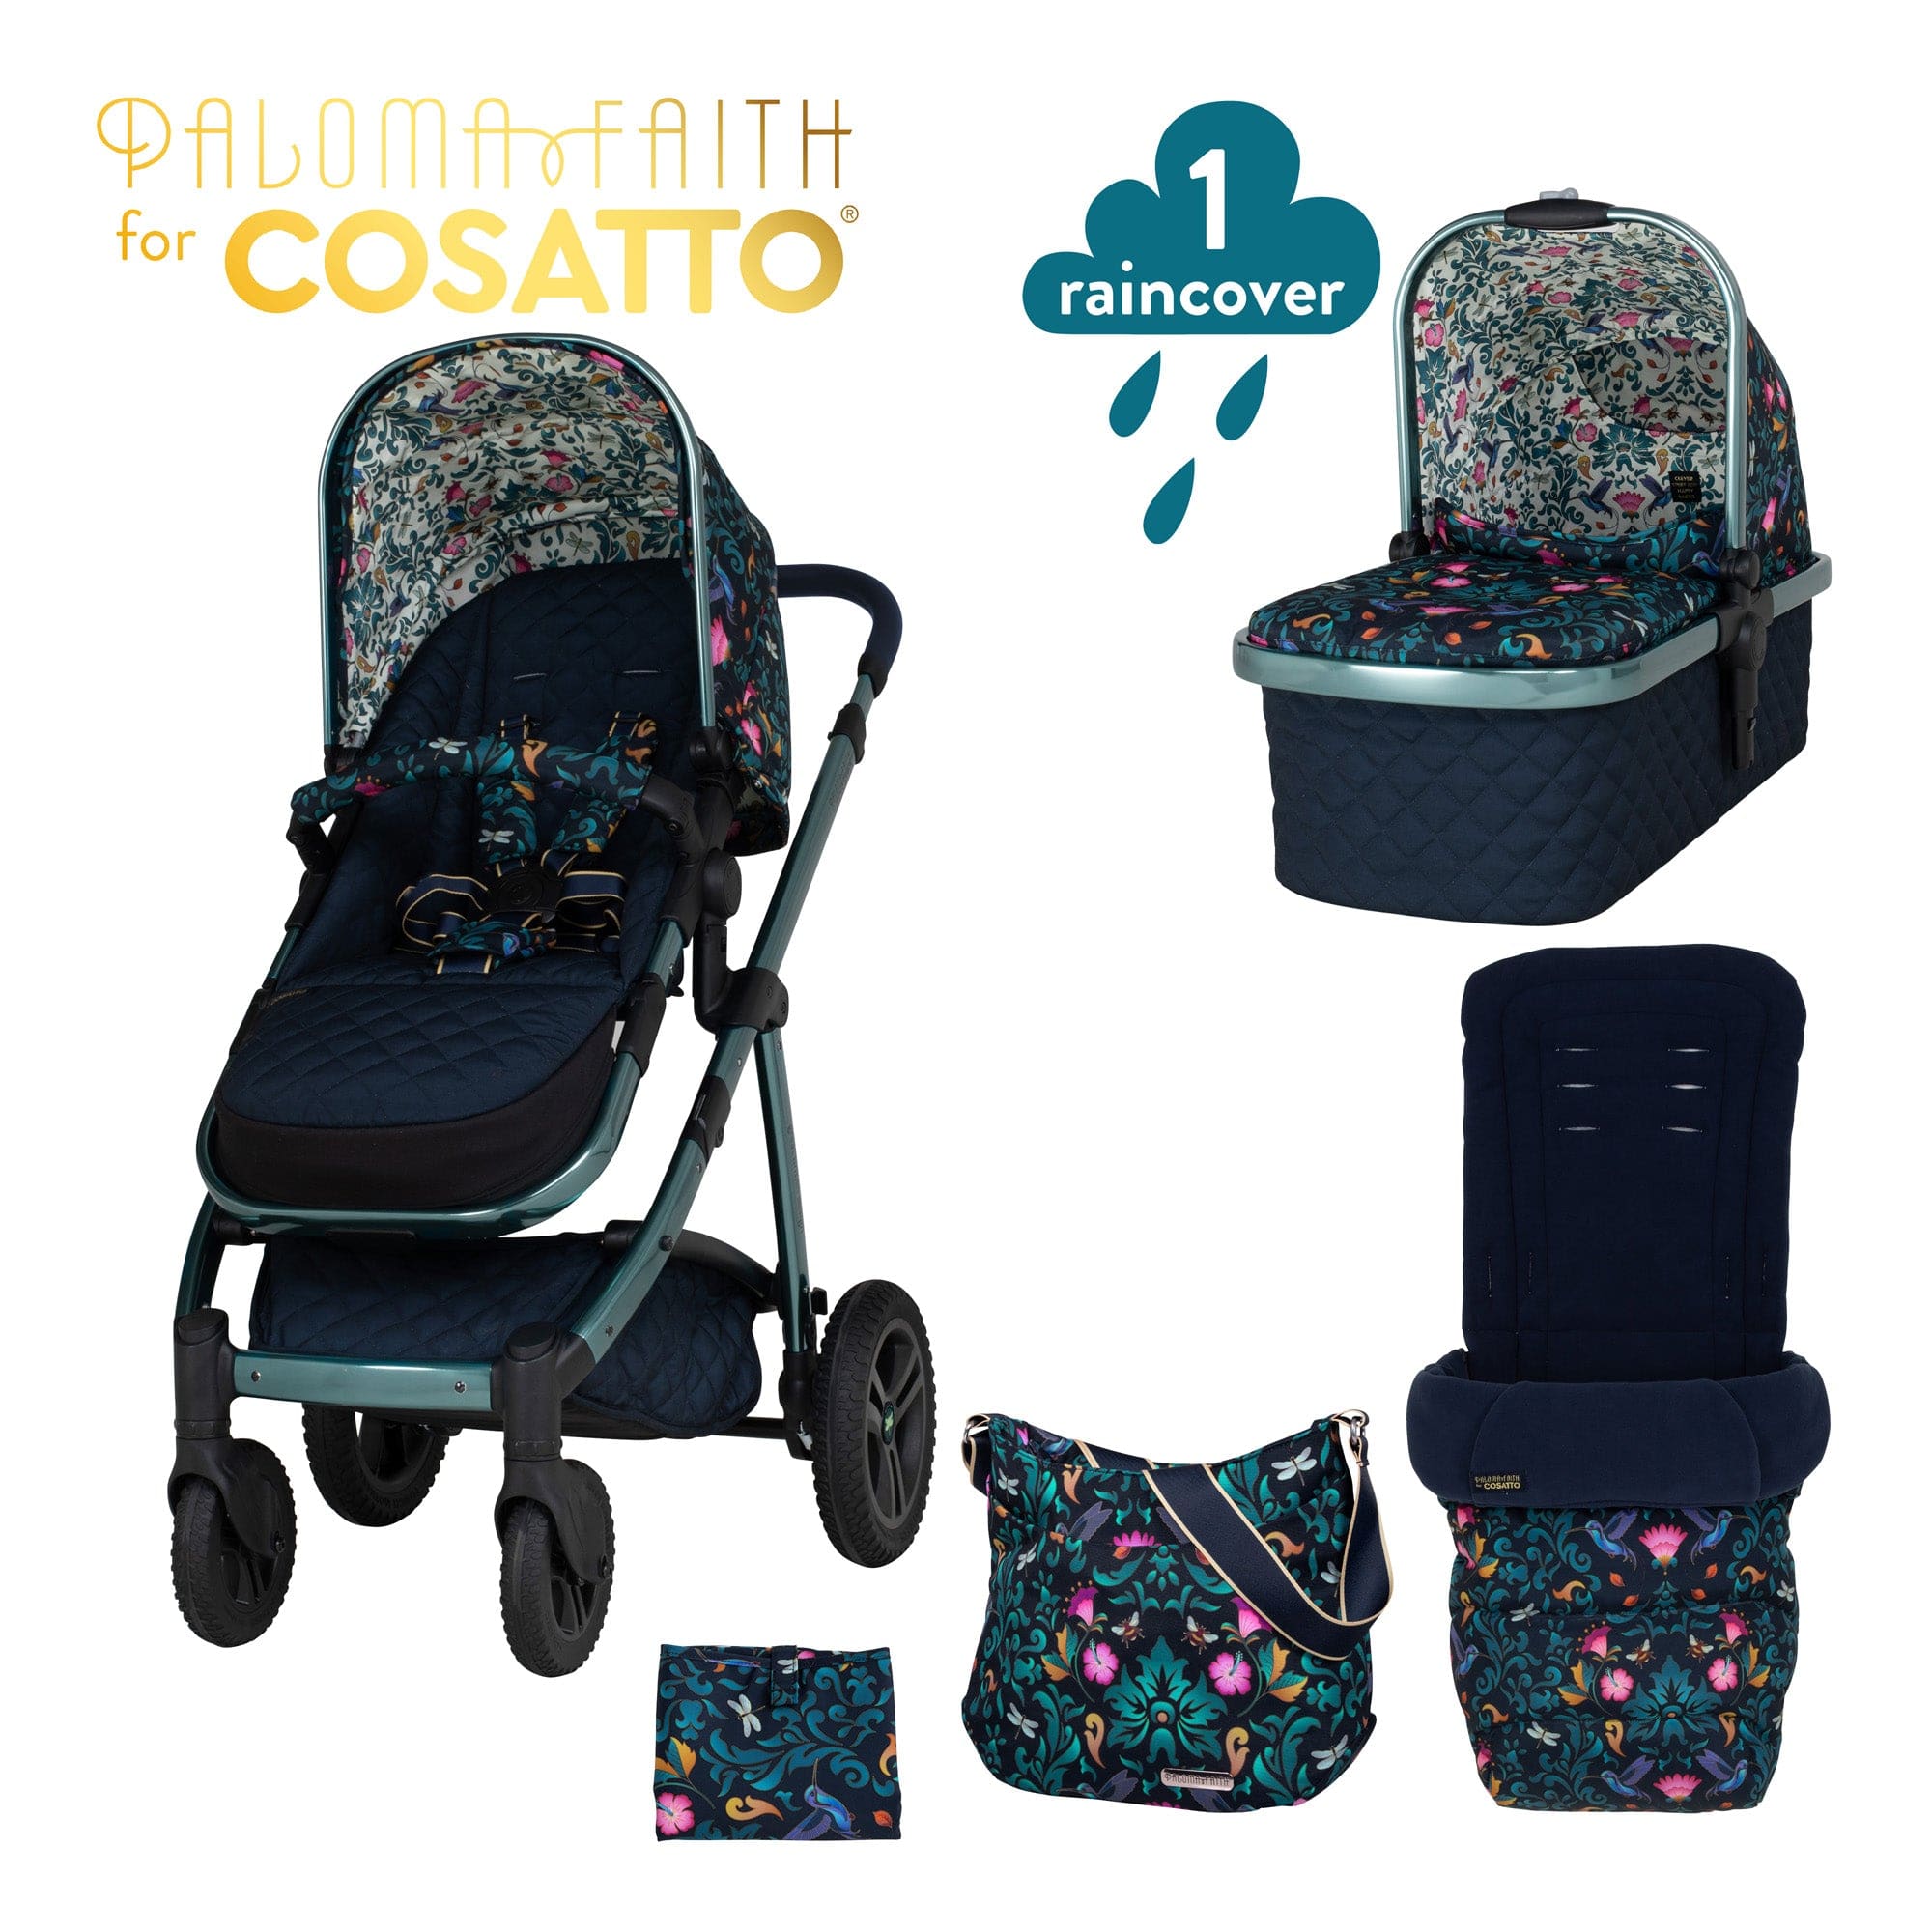 Cosatto baby prams Cosatto Wow Continental Pushchair/Pram and Accessories Wildling CT5298